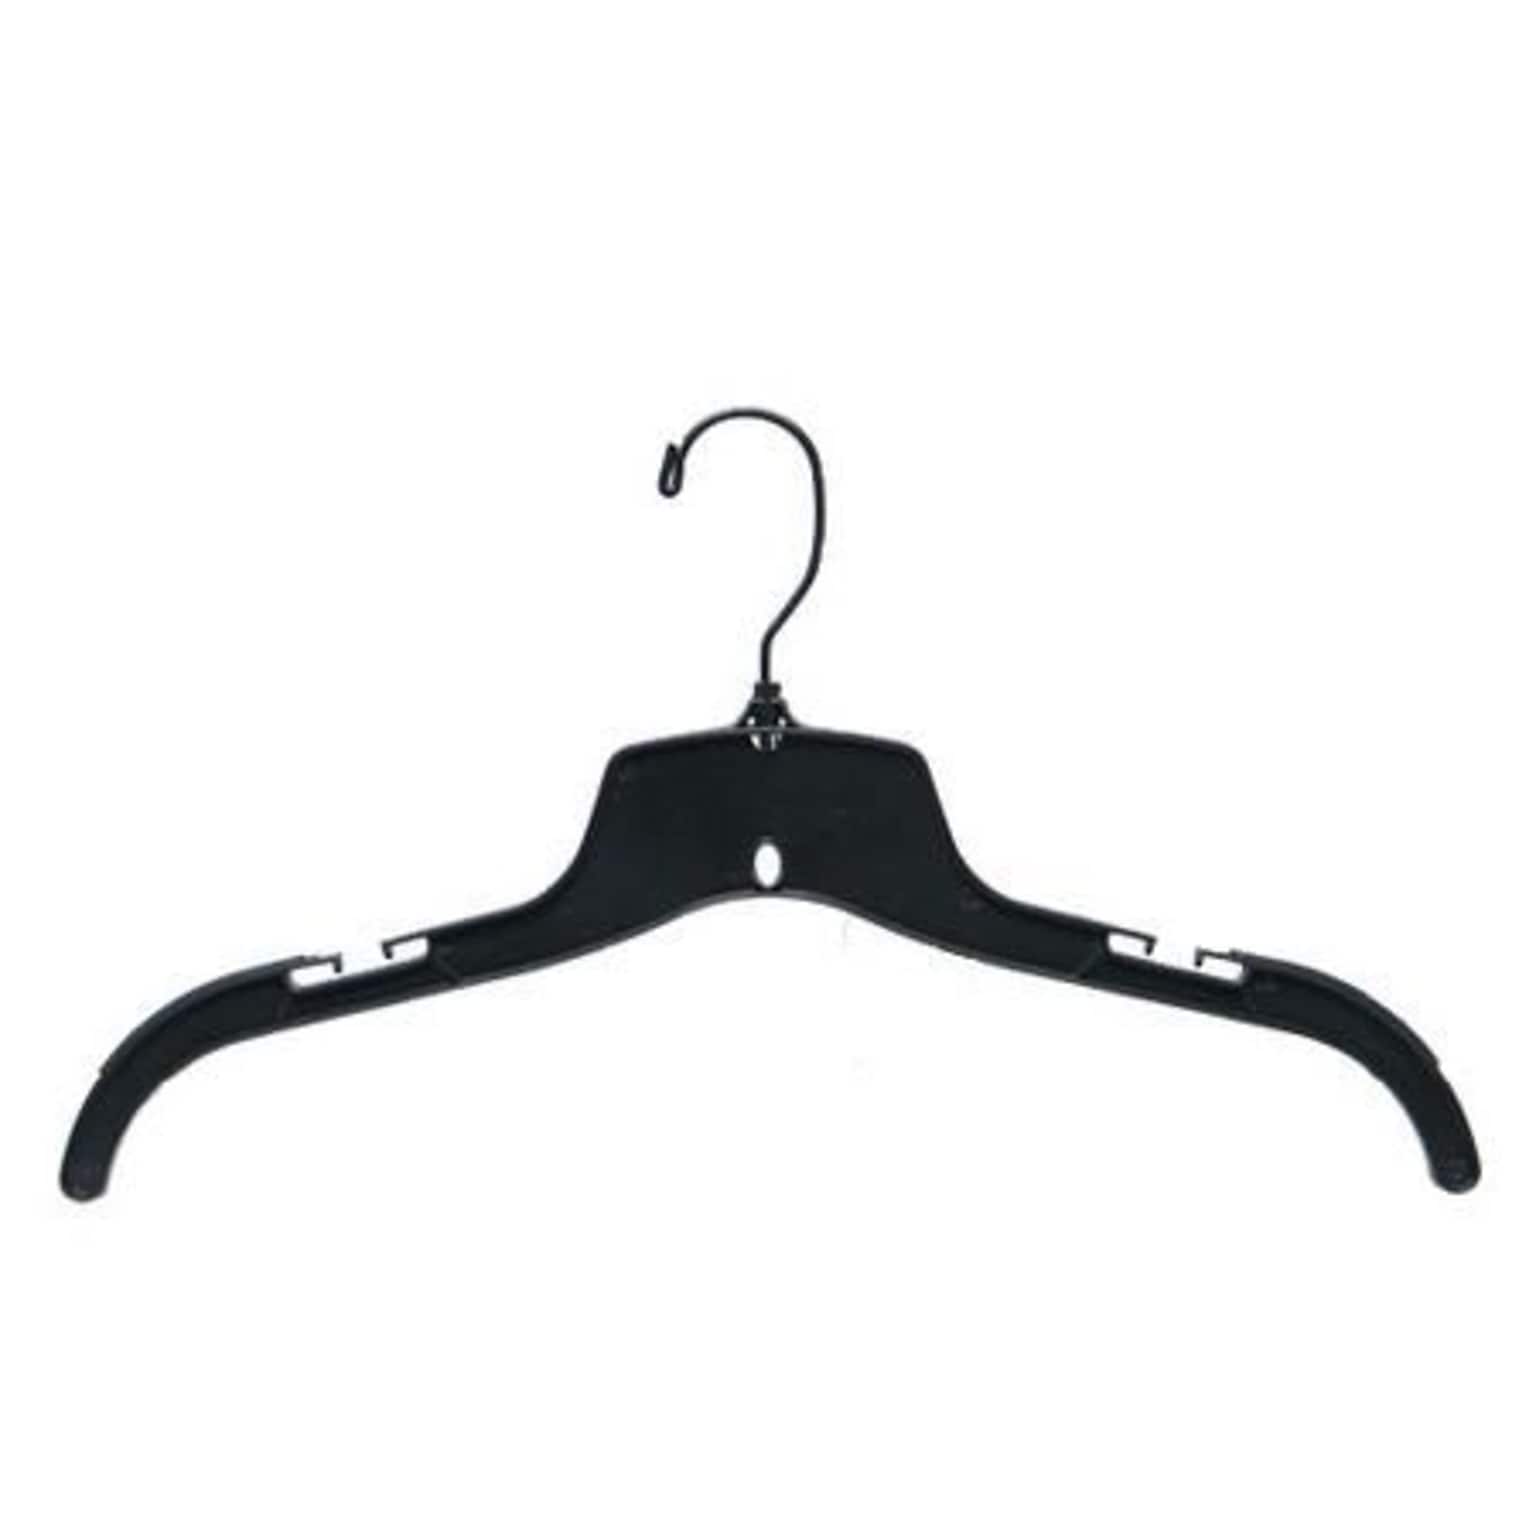 NAHANCO 17 Plastic Heavy Weight Top Hanger With Molded Gripper, Black Hook, Black, 100/Pack